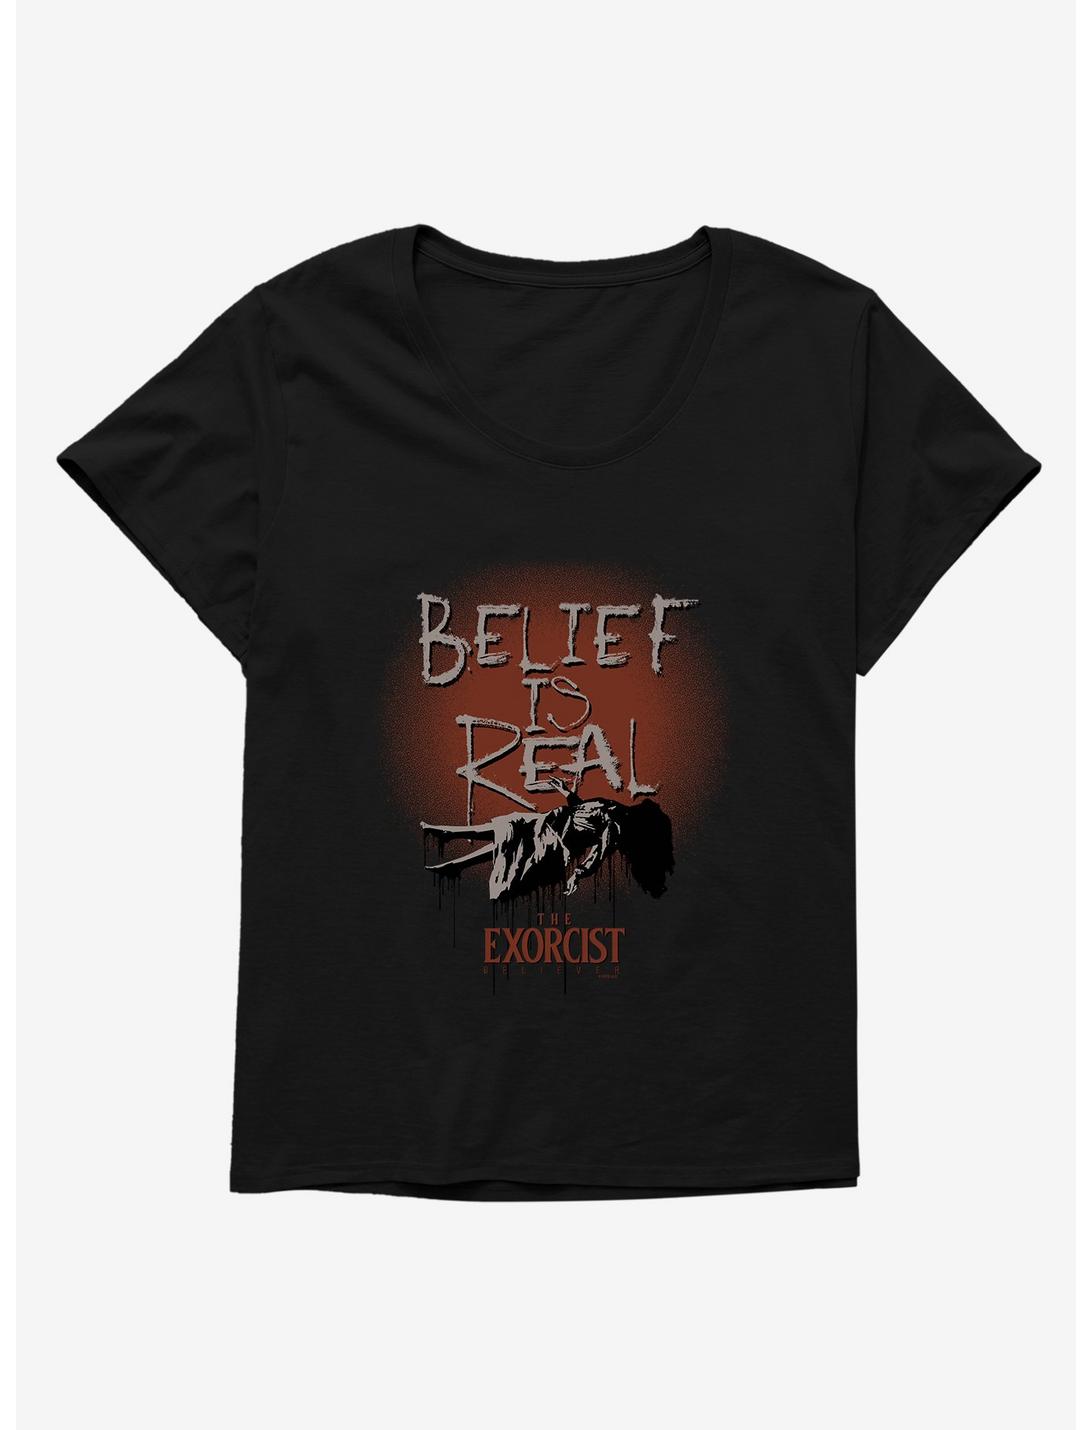 The Exorcist Believer Belief Is Real Girls T-Shirt Plus Size, BLACK, hi-res